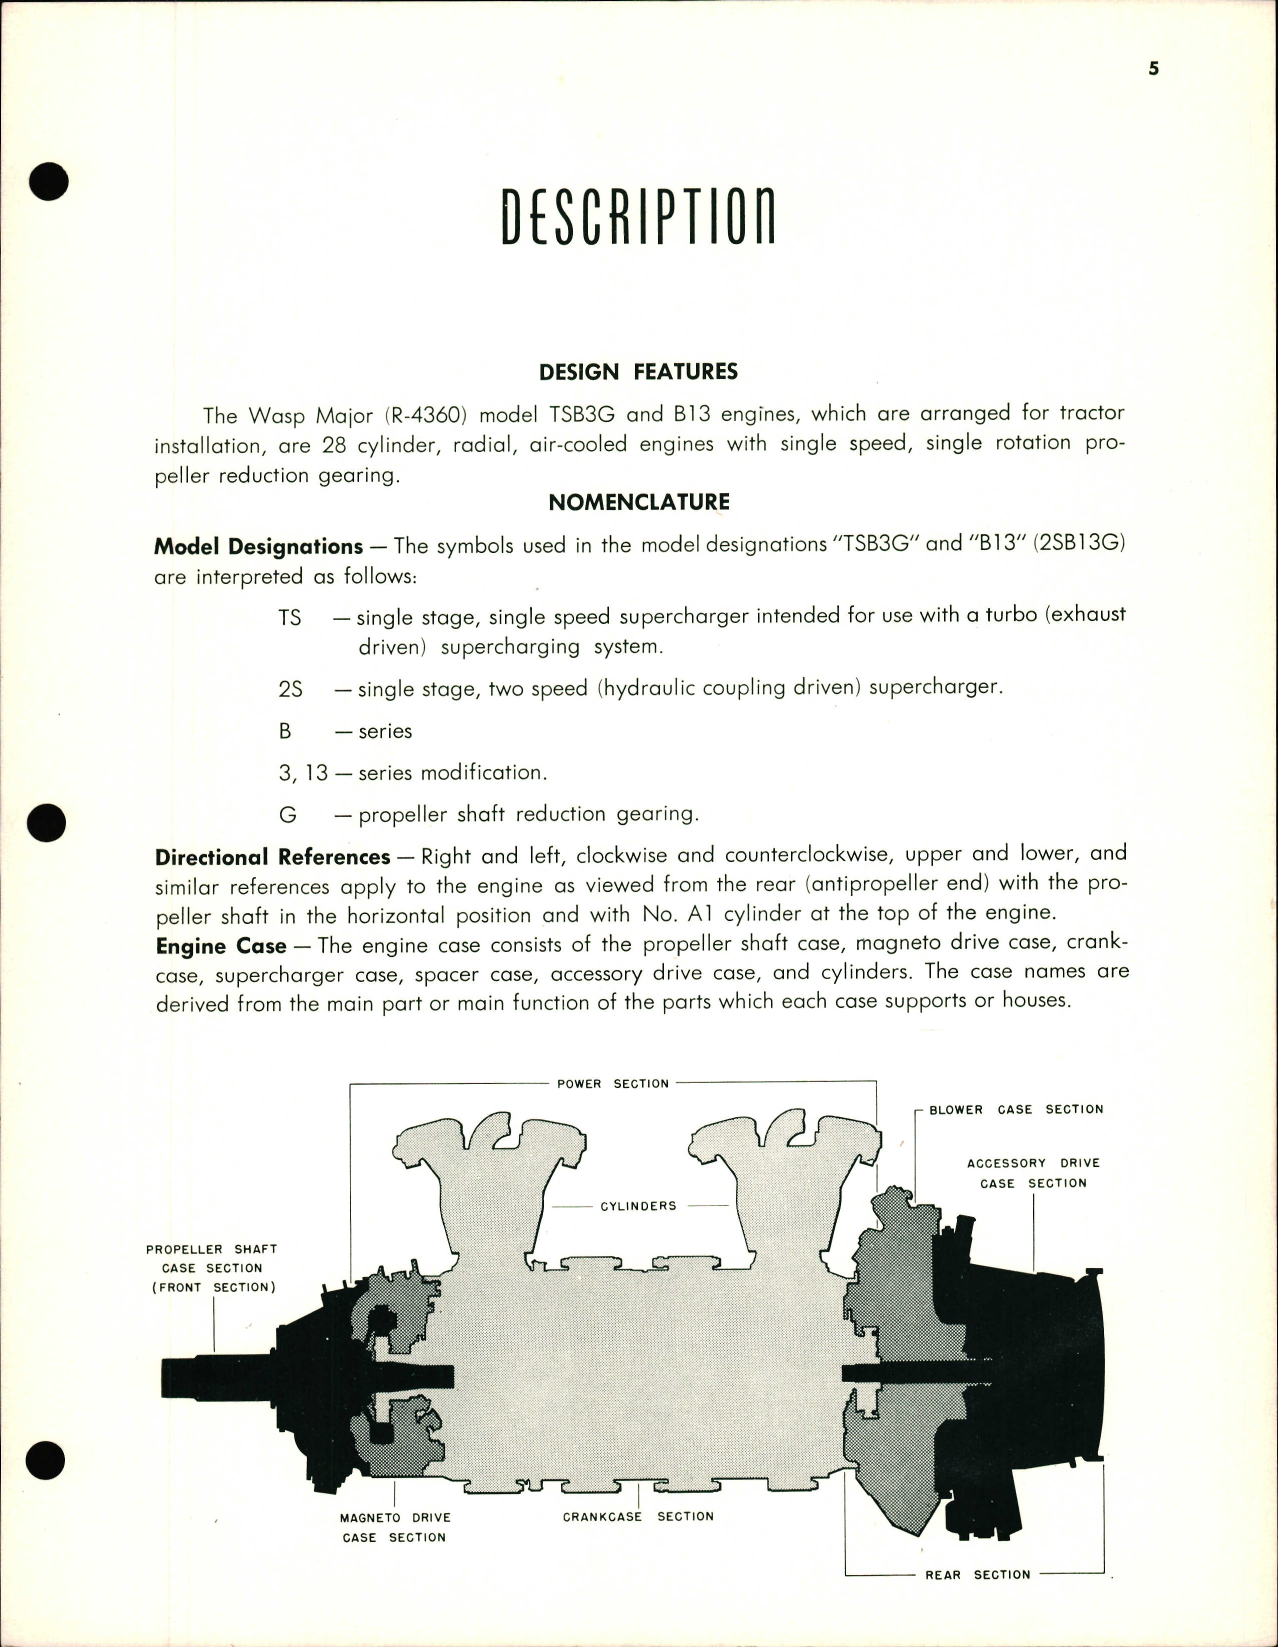 Sample page 5 from AirCorps Library document: Overhaul Manual for Wasp Major TSB3G and B13 Engines